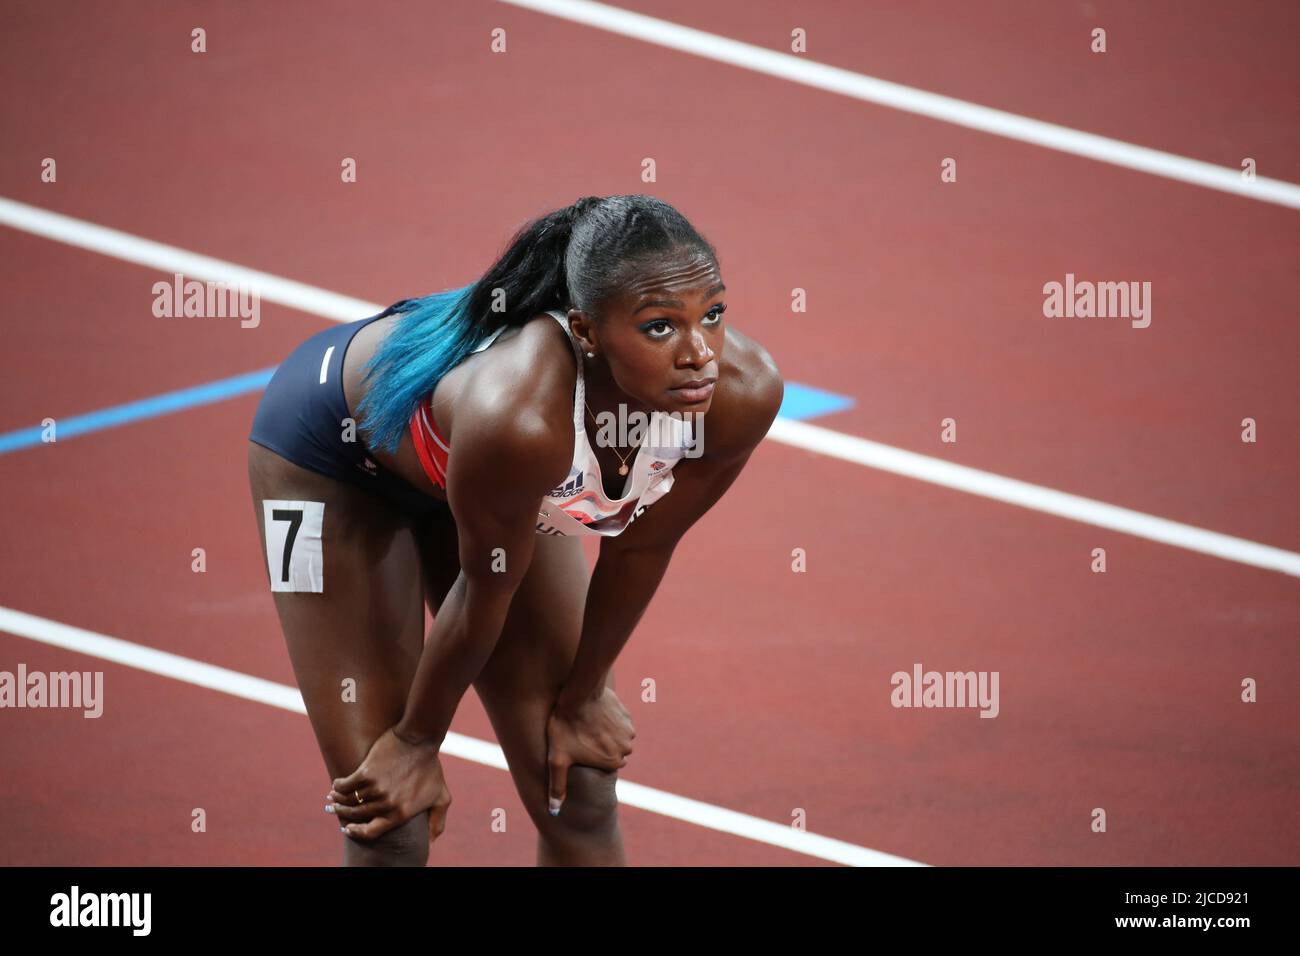 JULY 31st, 2021 - TOKYO, JAPAN: Dina Asher-Smith reacts finishing third in 11.05 the Women's 100m Semi-Final 1 behind Ajla del Ponte of Switzerland in Stock Photo